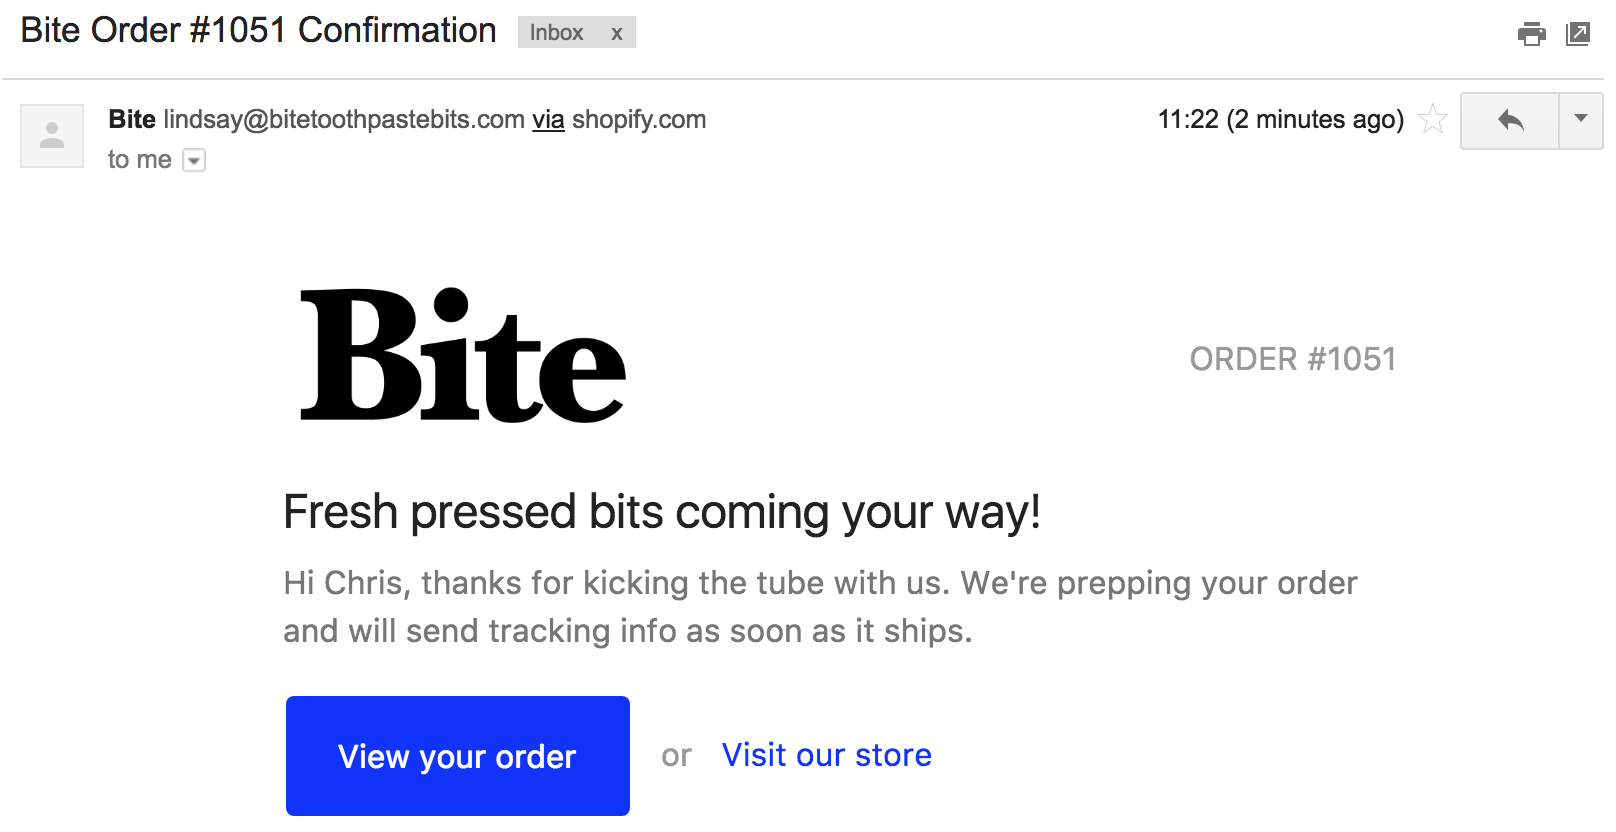 Screenshot showing an email sent by Bite